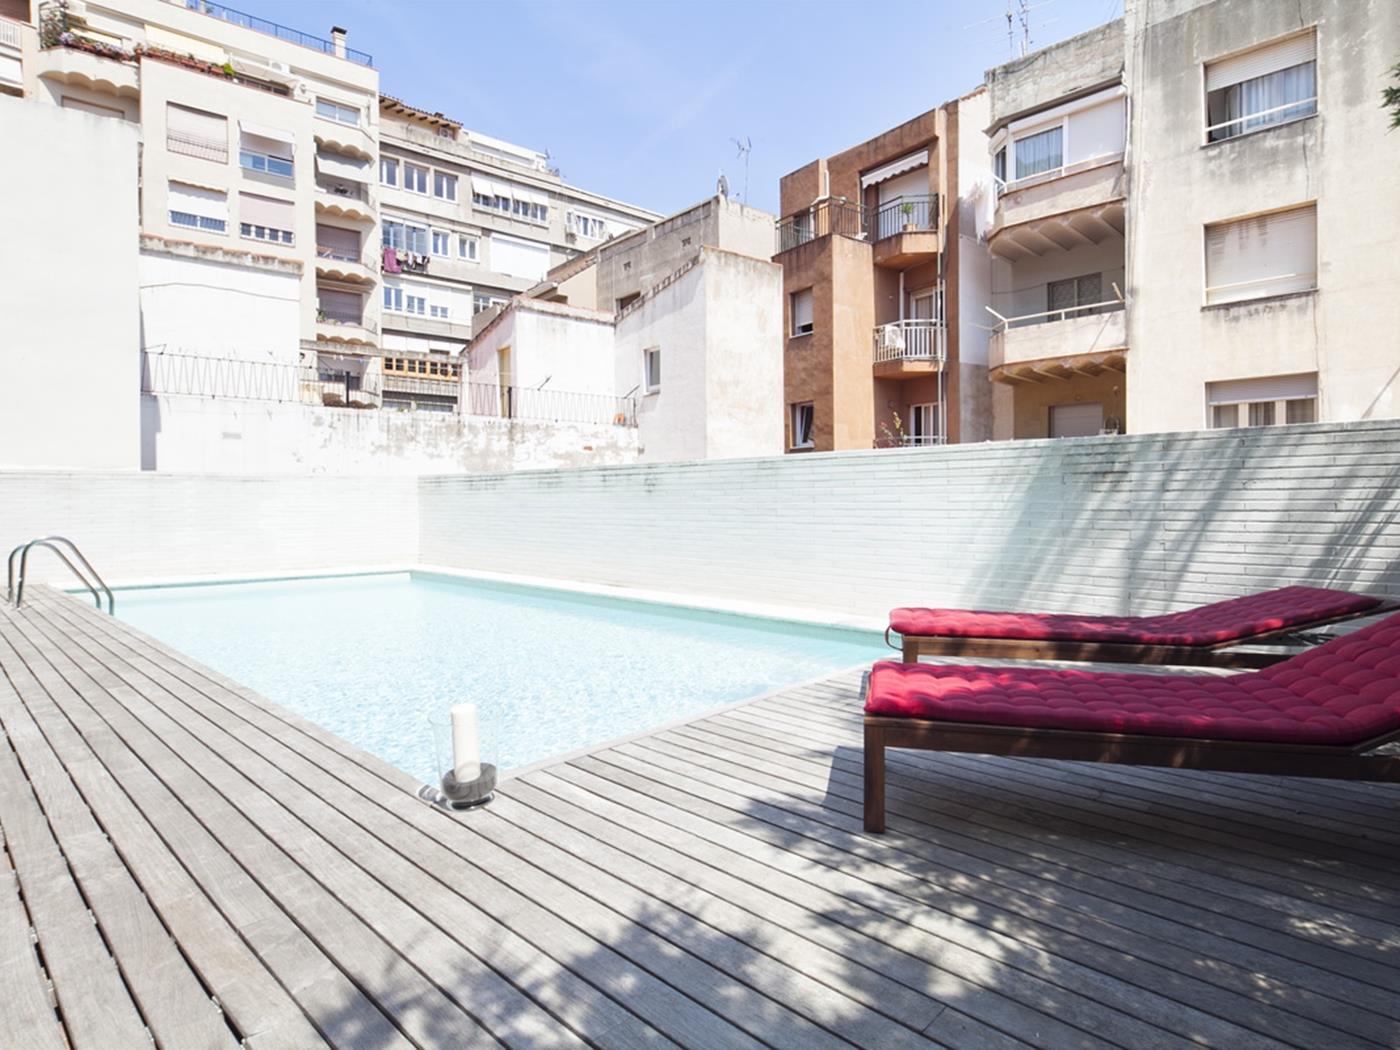 Apartment with Swimming Pool near Sagrada Familia - My Space Barcelona Aпартаменты